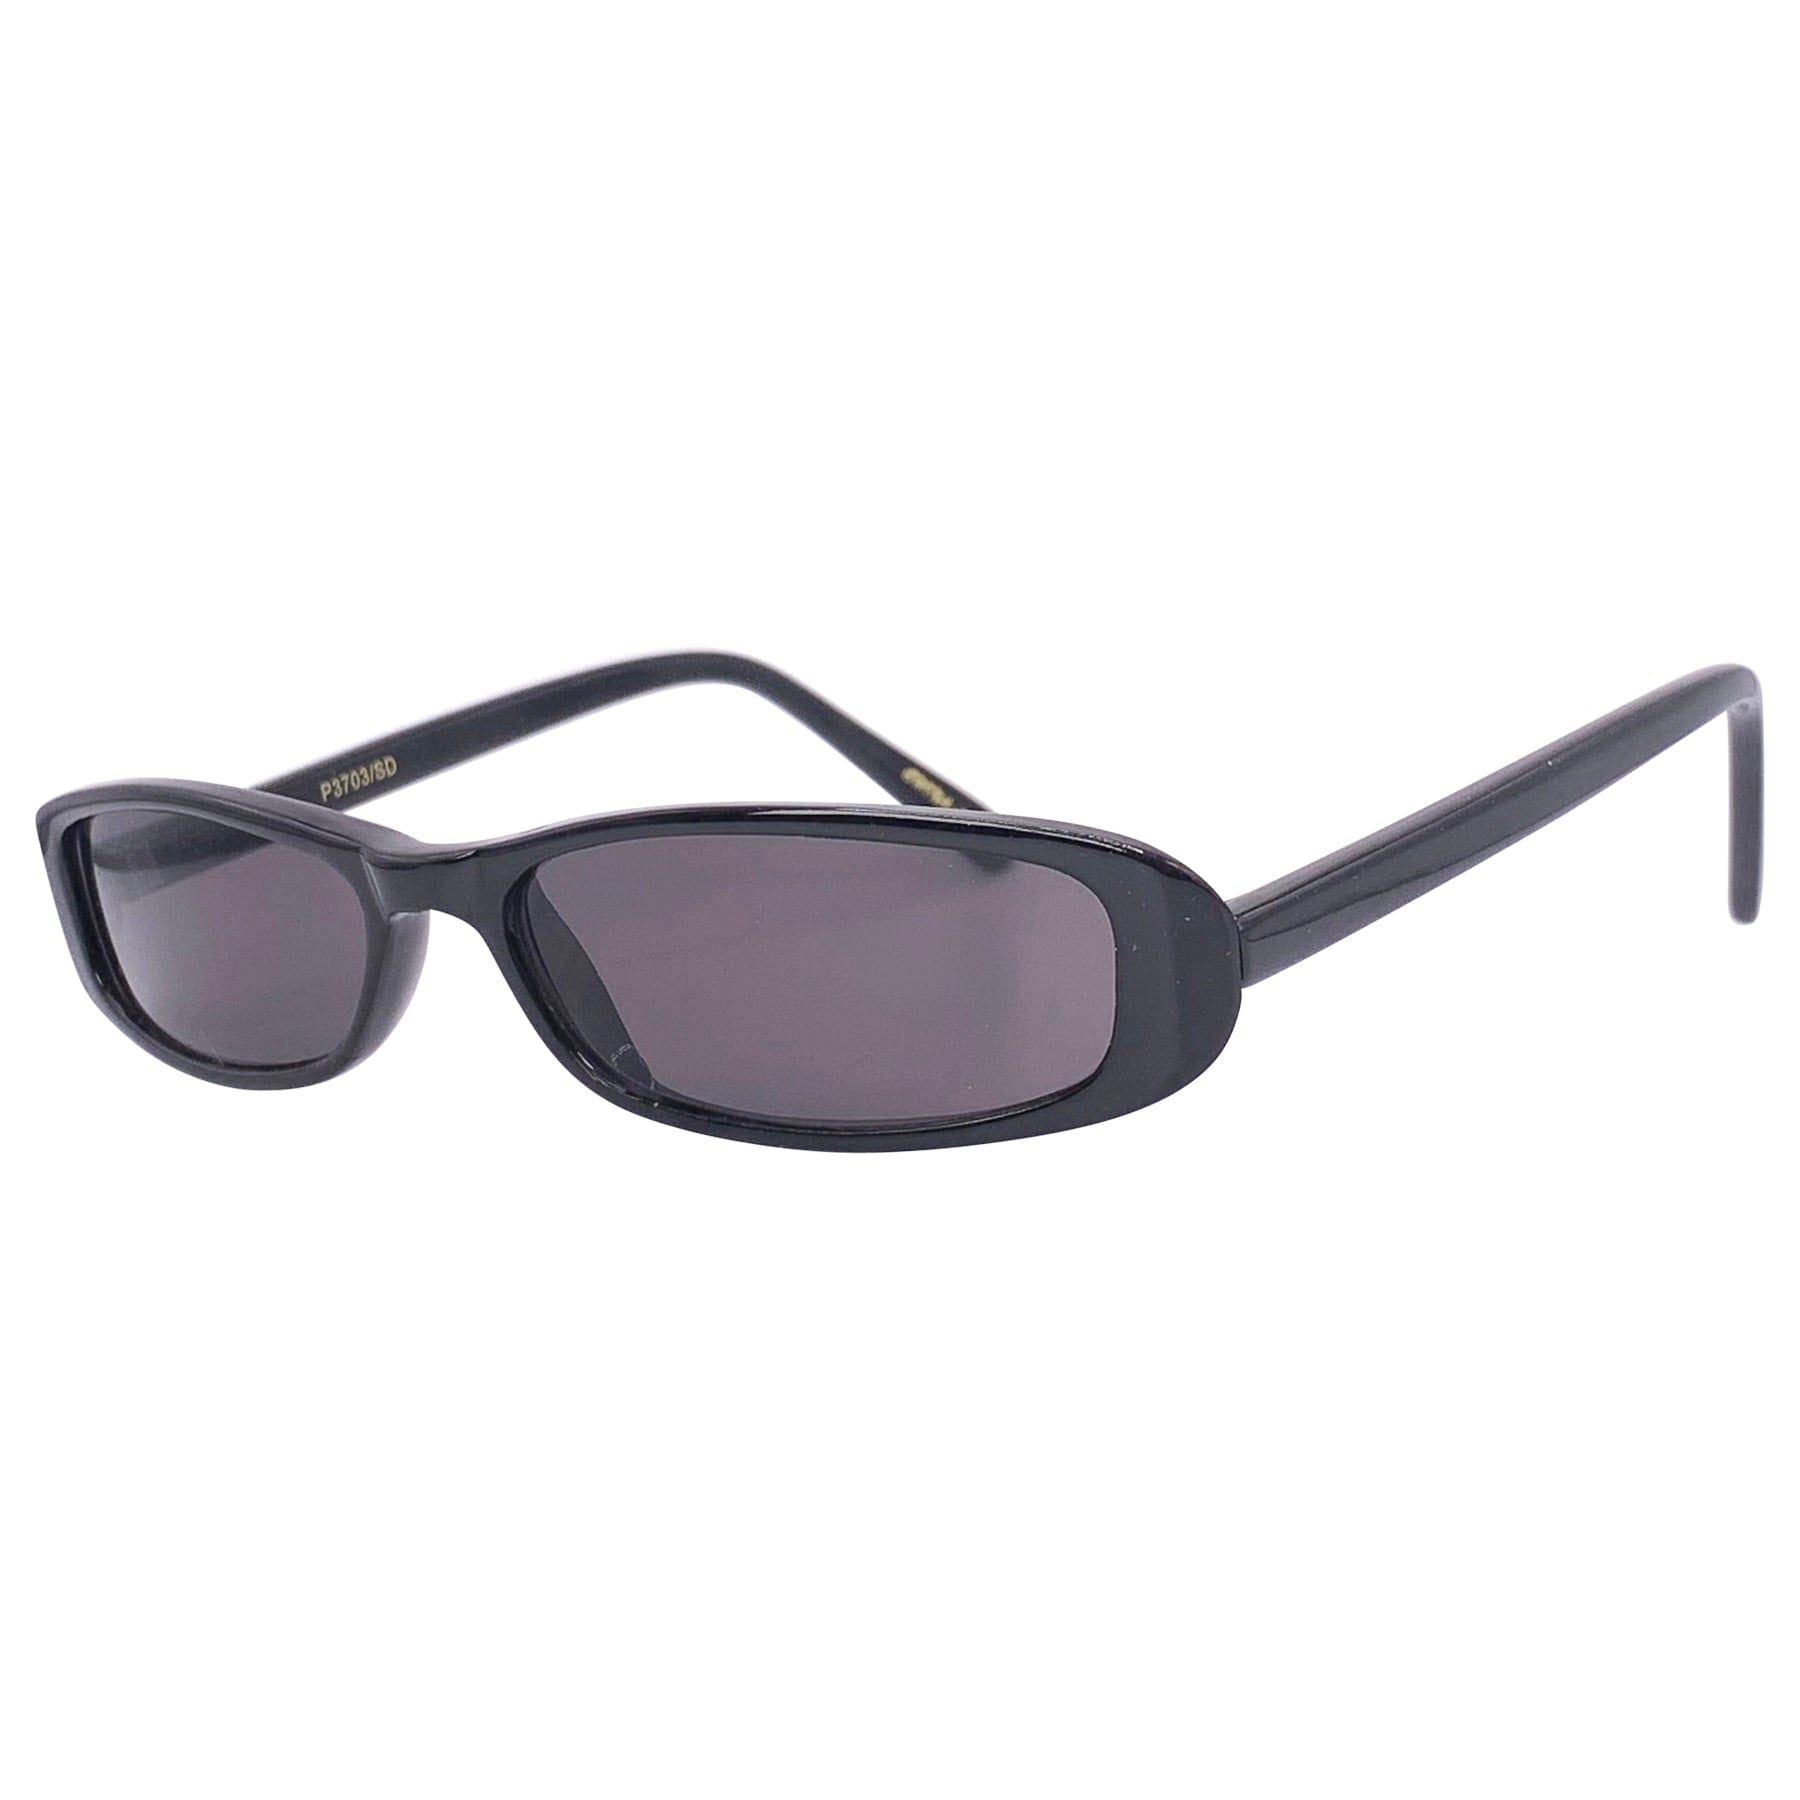 black vintage sunglasses mens and womens with a 90s style frame